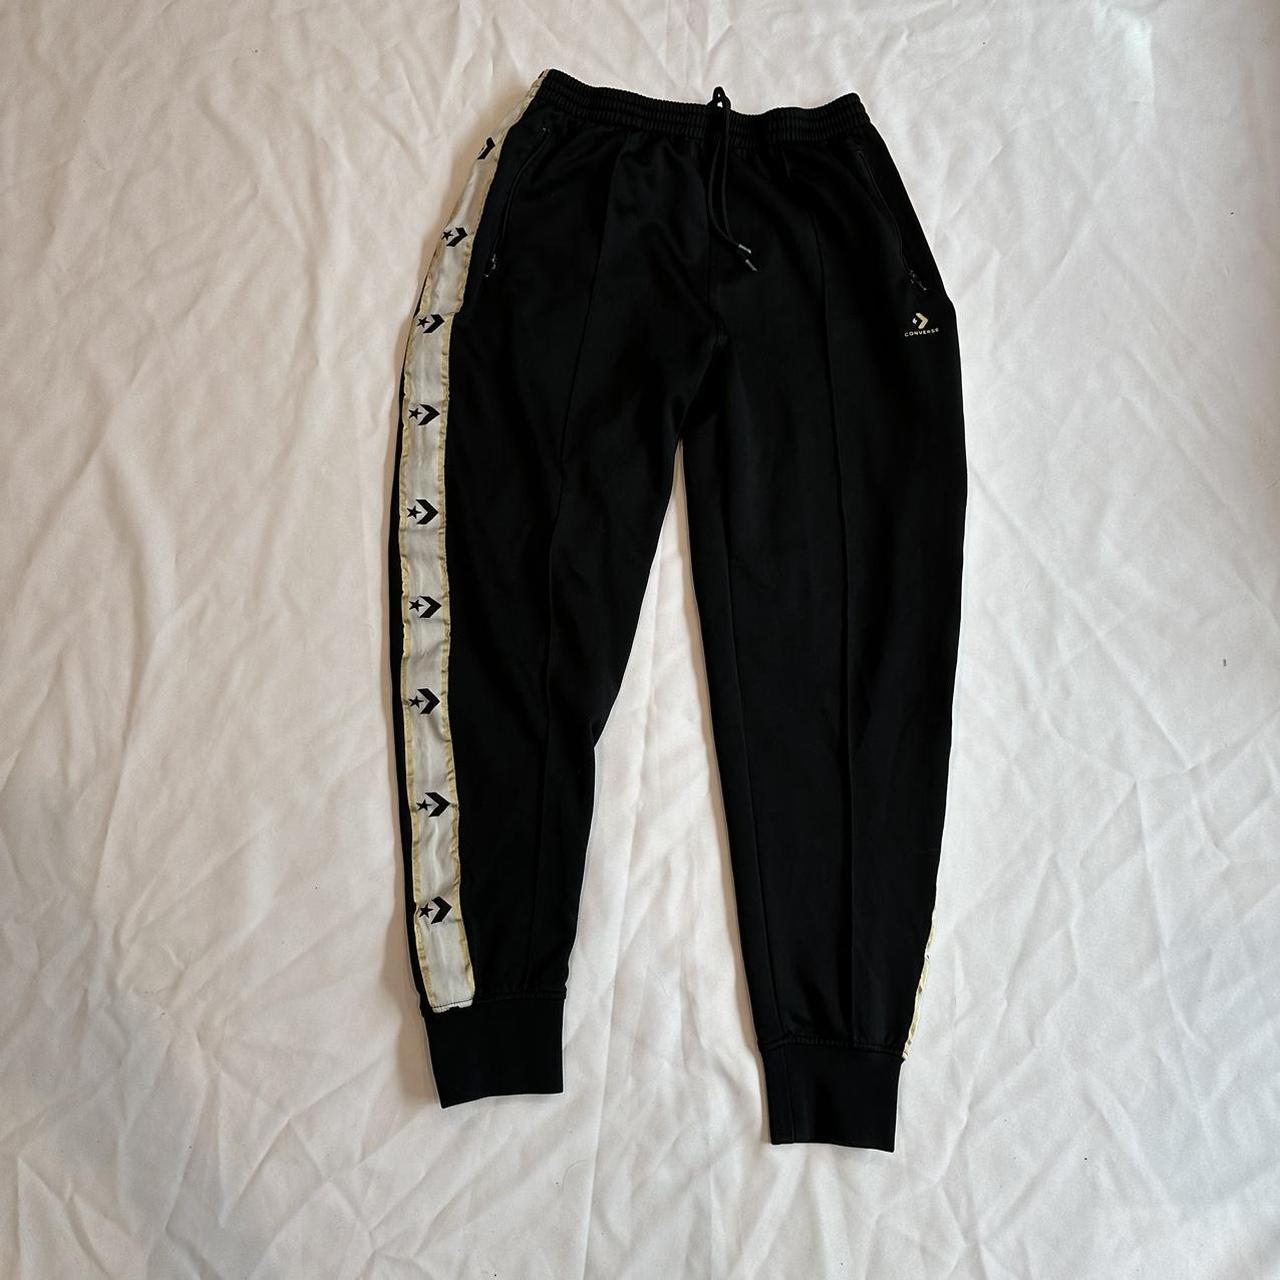 Converse Men's Black and White Joggers-tracksuits